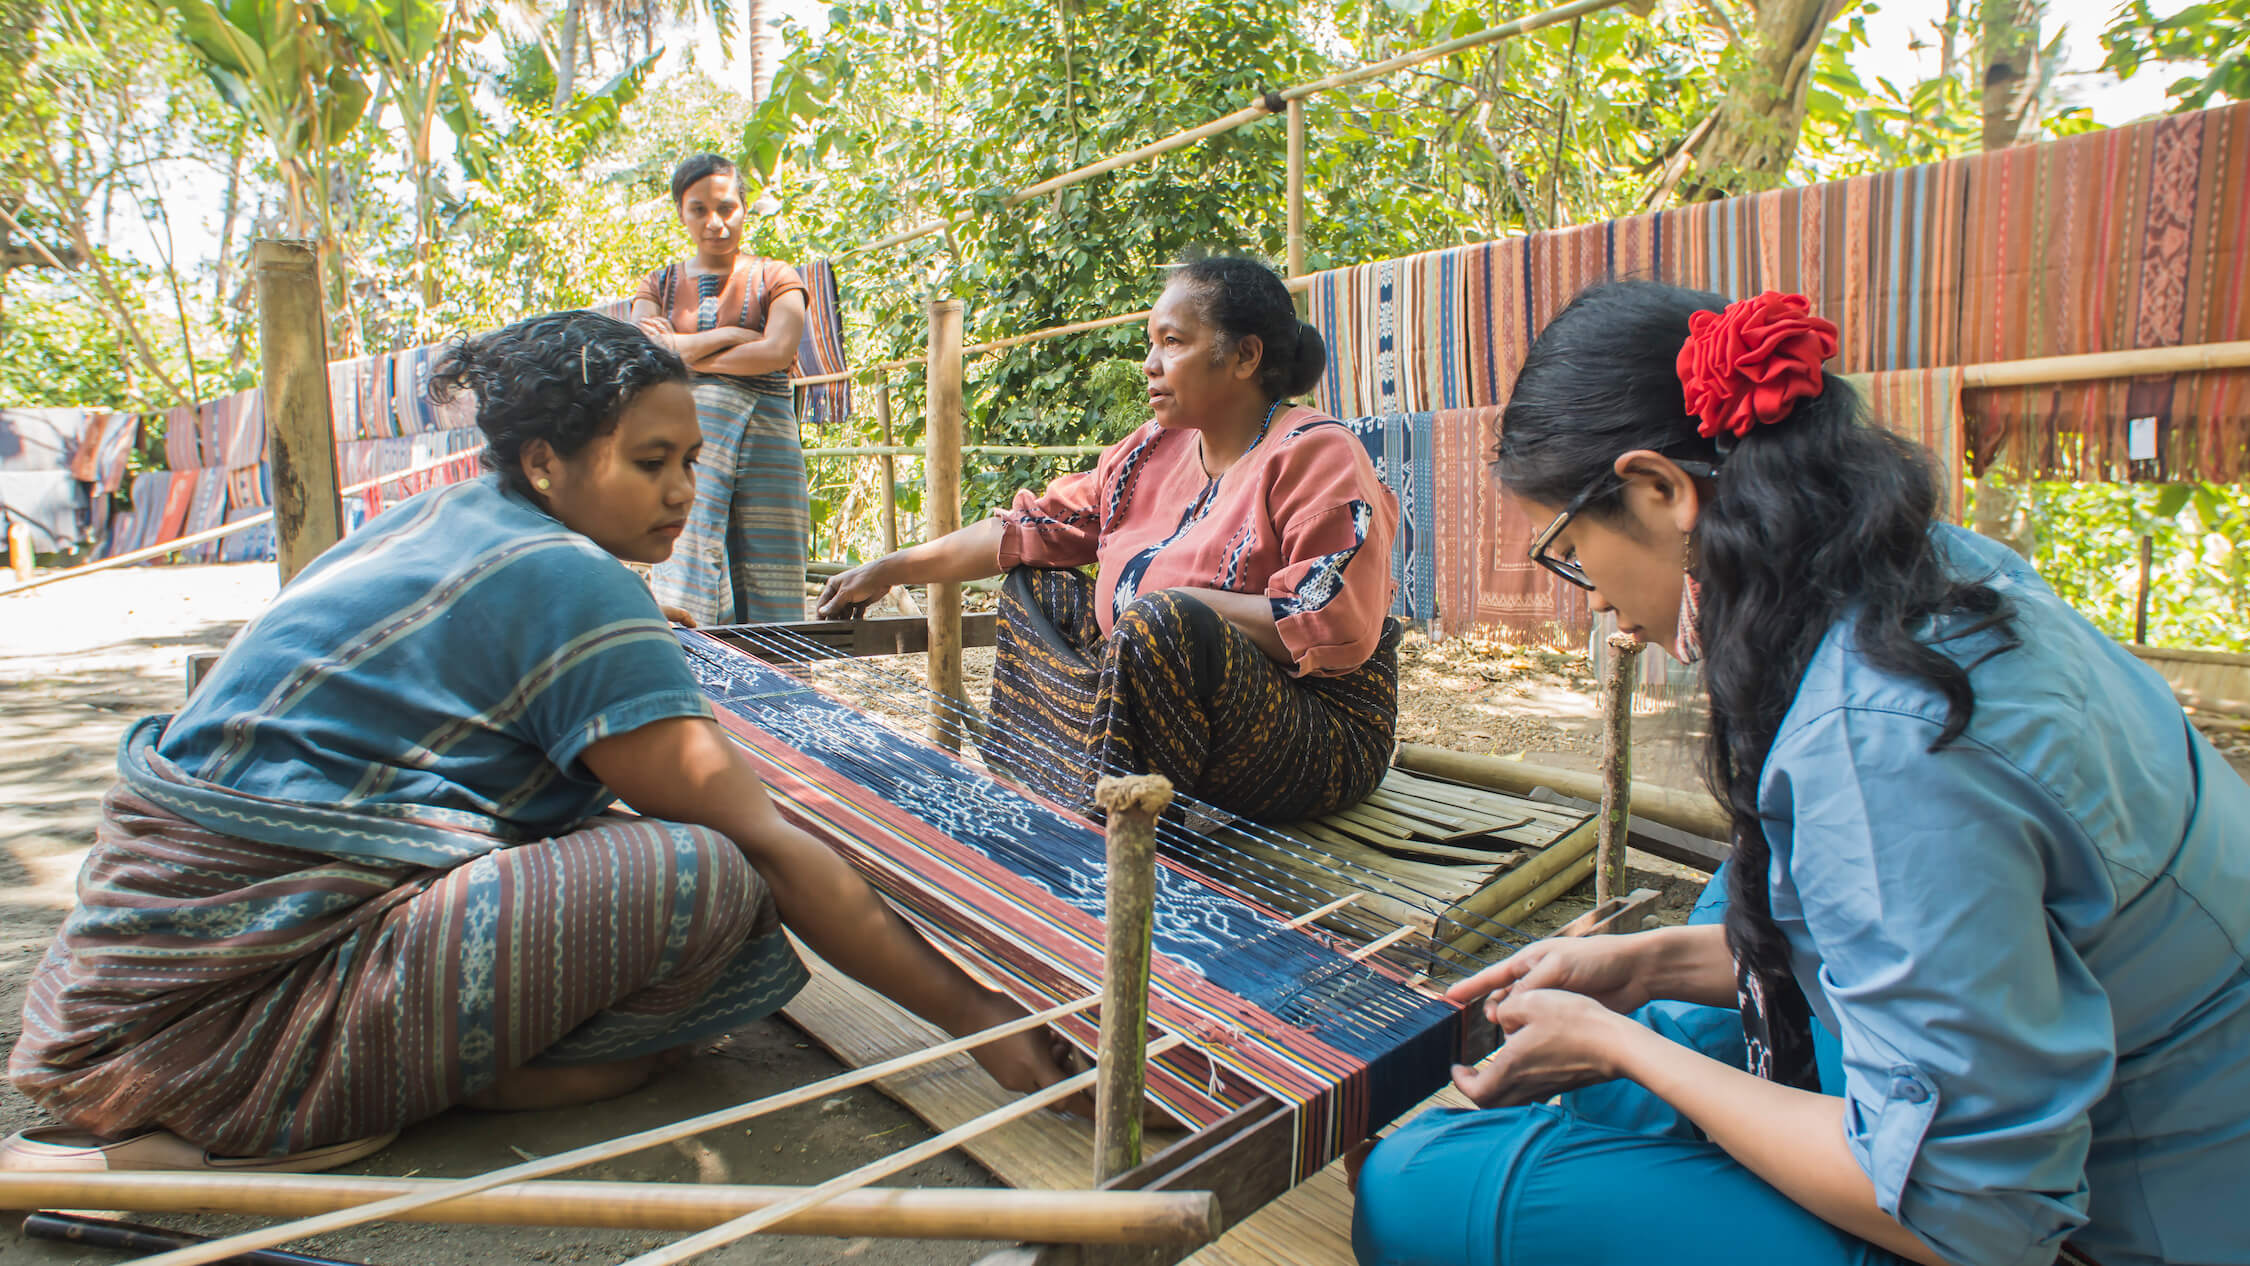 Maria Suwanti instructs Grace on warping other coloured threads for striped detailing, using a local Watublapi motif set up for the lesson. Photo by Andra Fembriarto